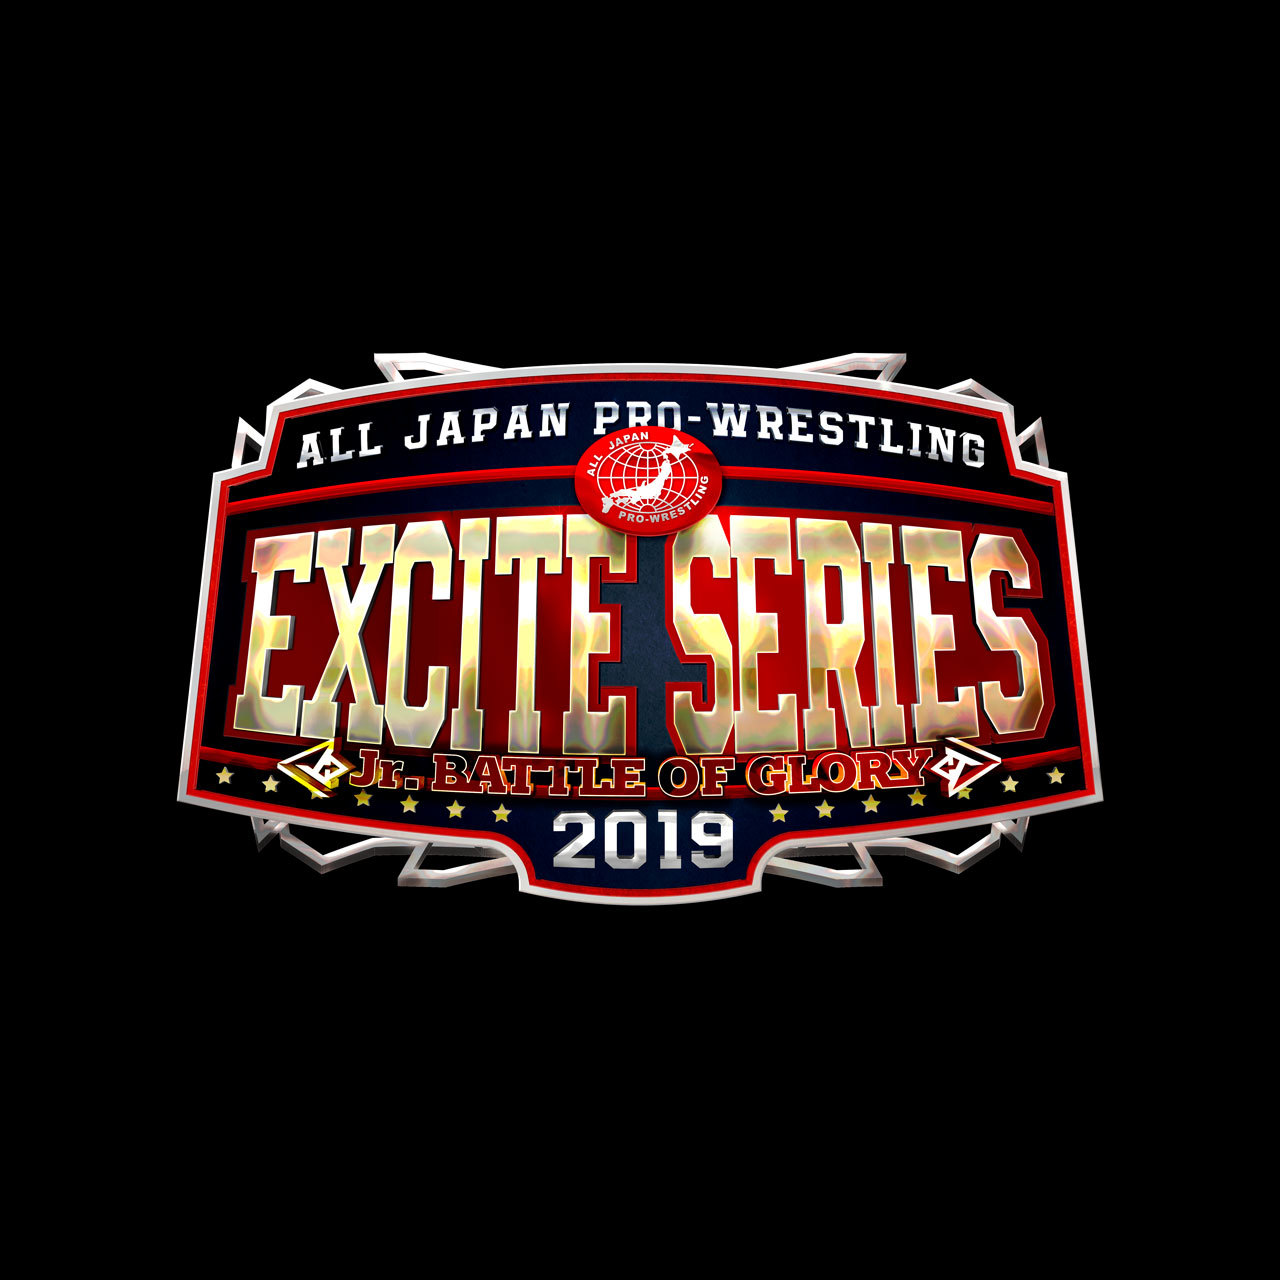 『2019 EXCITE SERIES[最終戦]』は2月24日（日）開催